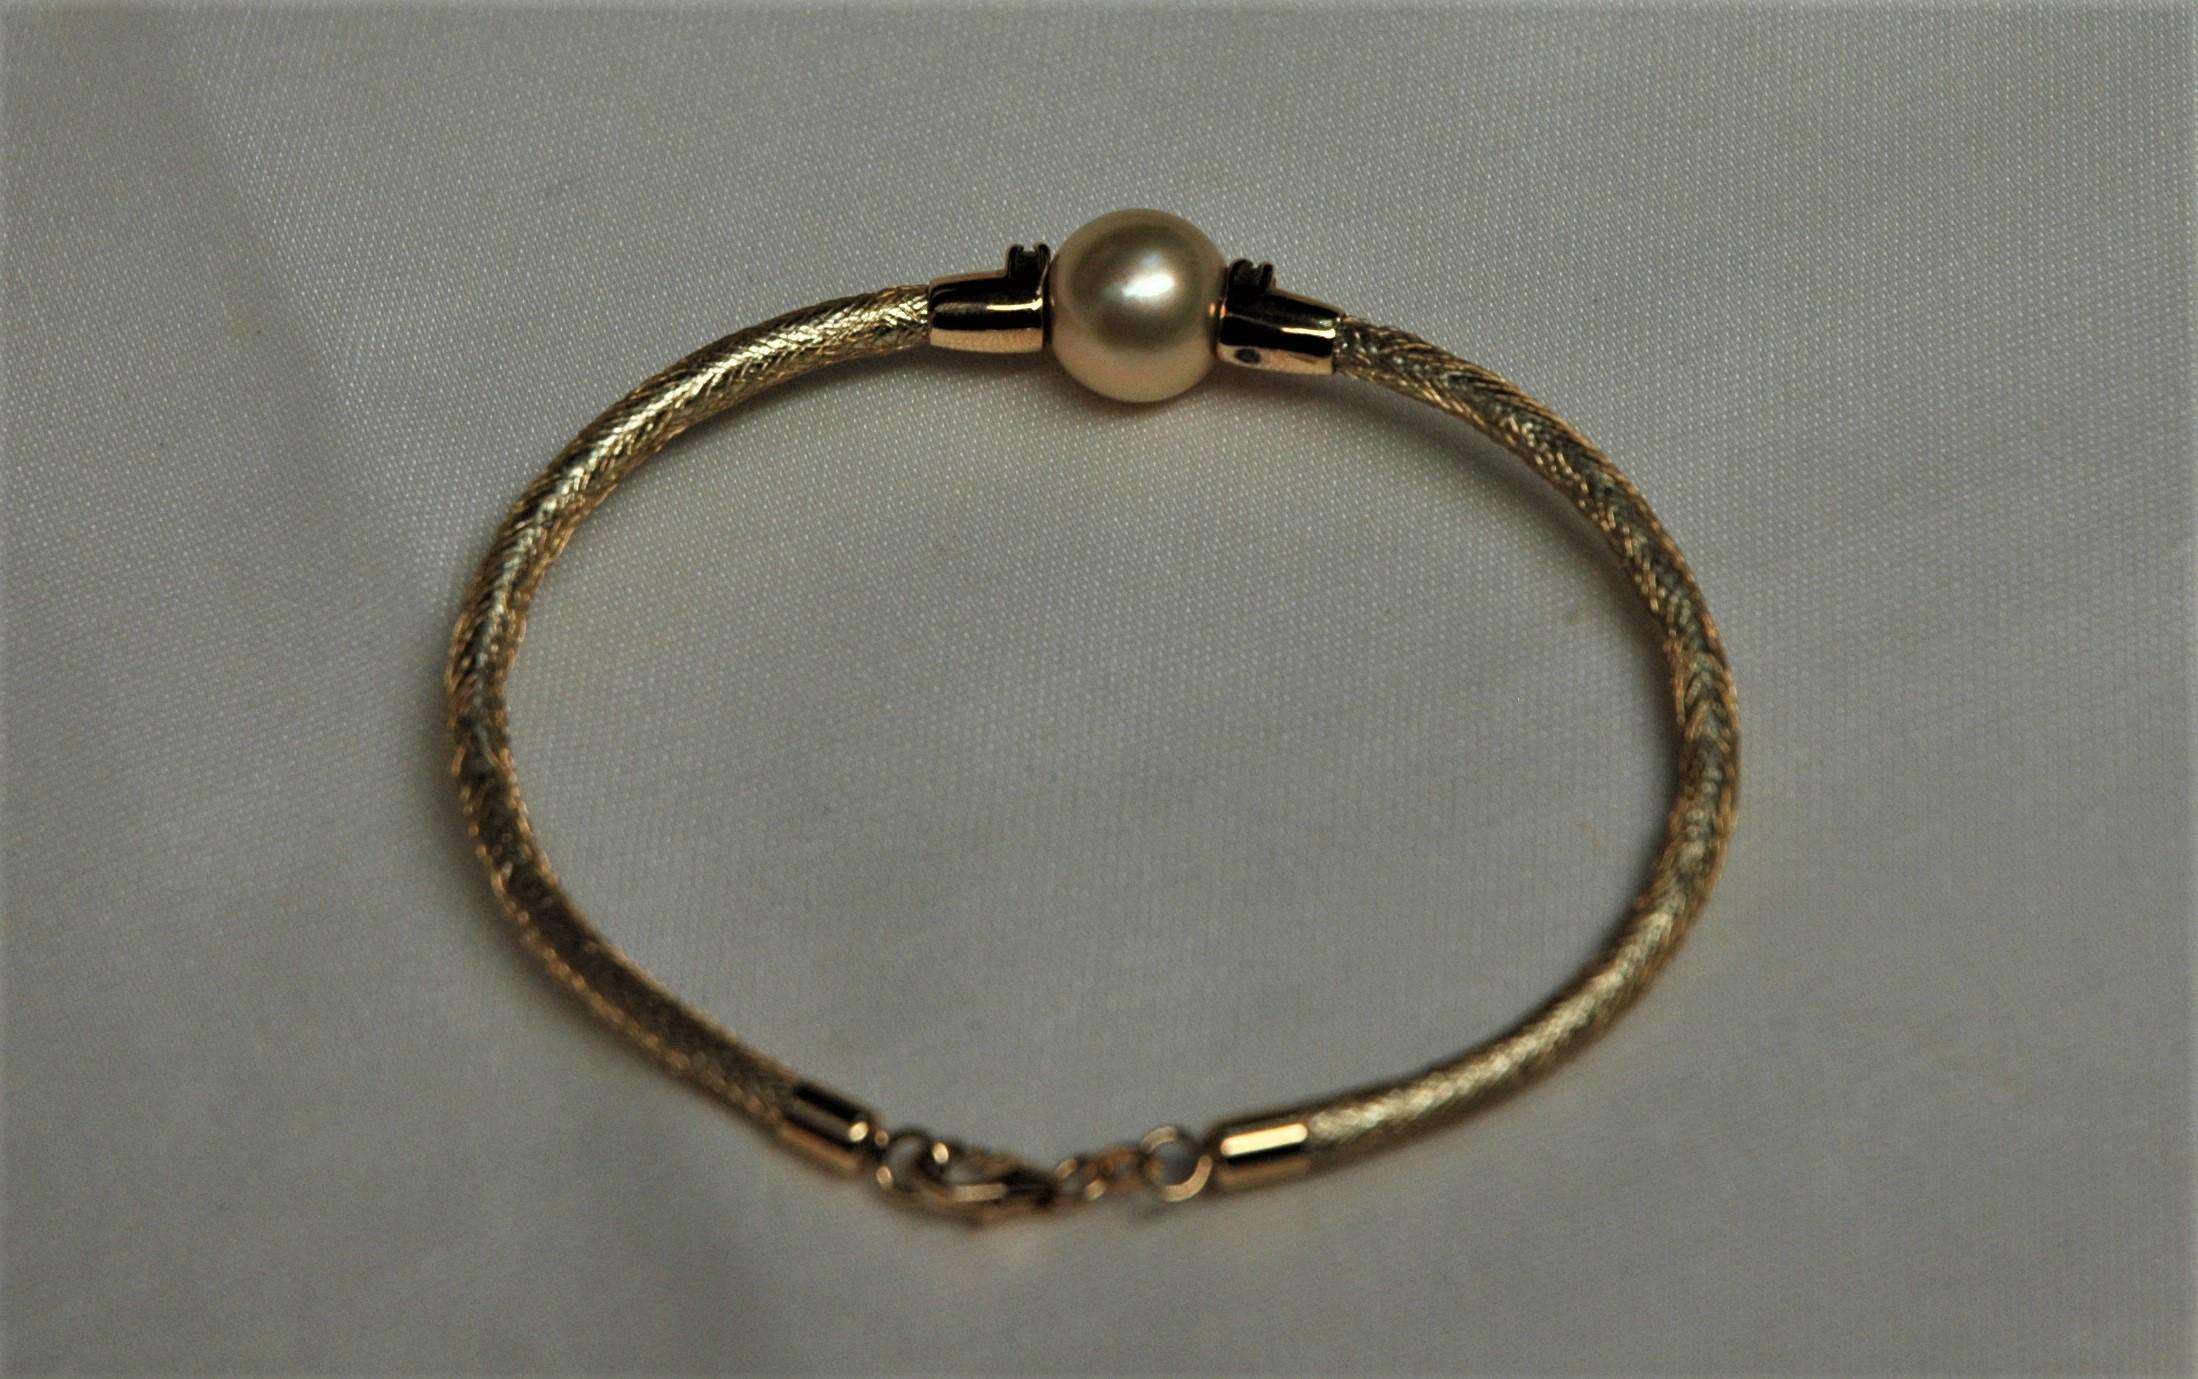 Brilliant Cut 18 Kt. Gold Bracelets with Pearls and Diamonds For Sale